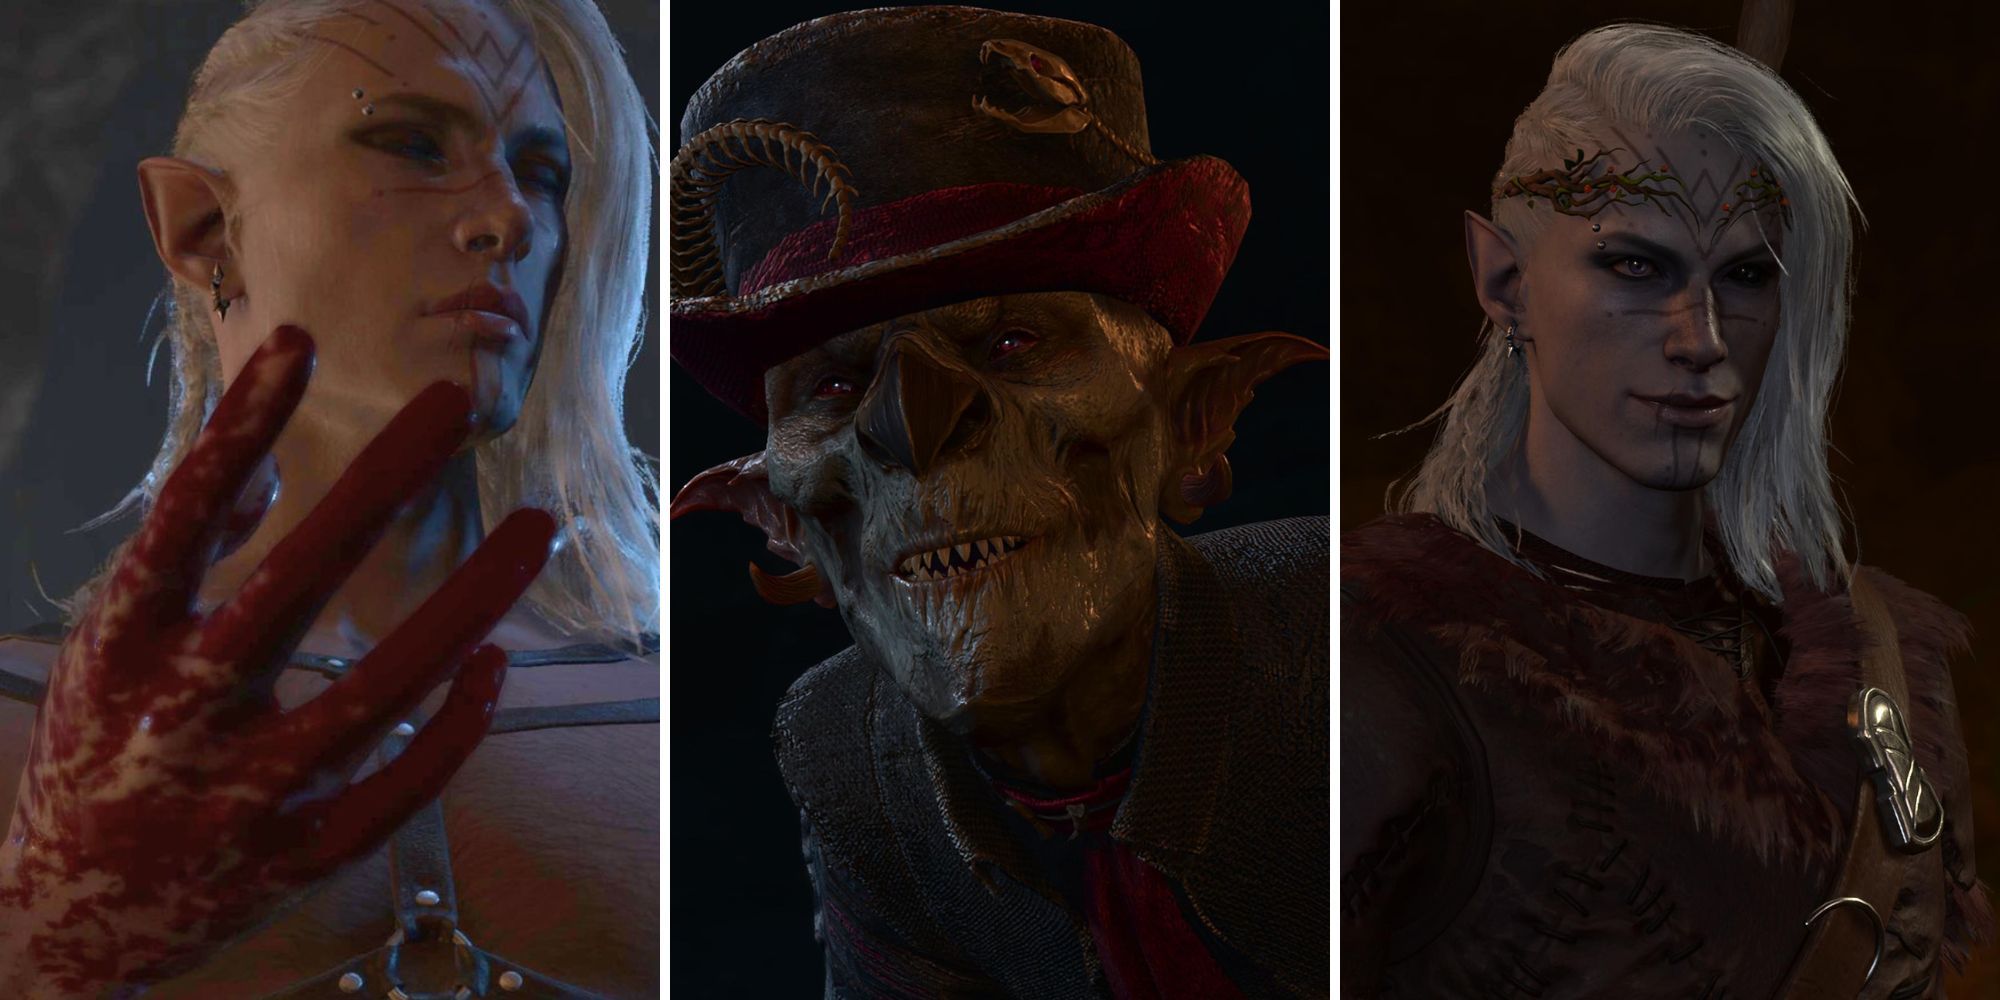 A grid of images showing a dark urge character and their butler in Baldur's Gate 3